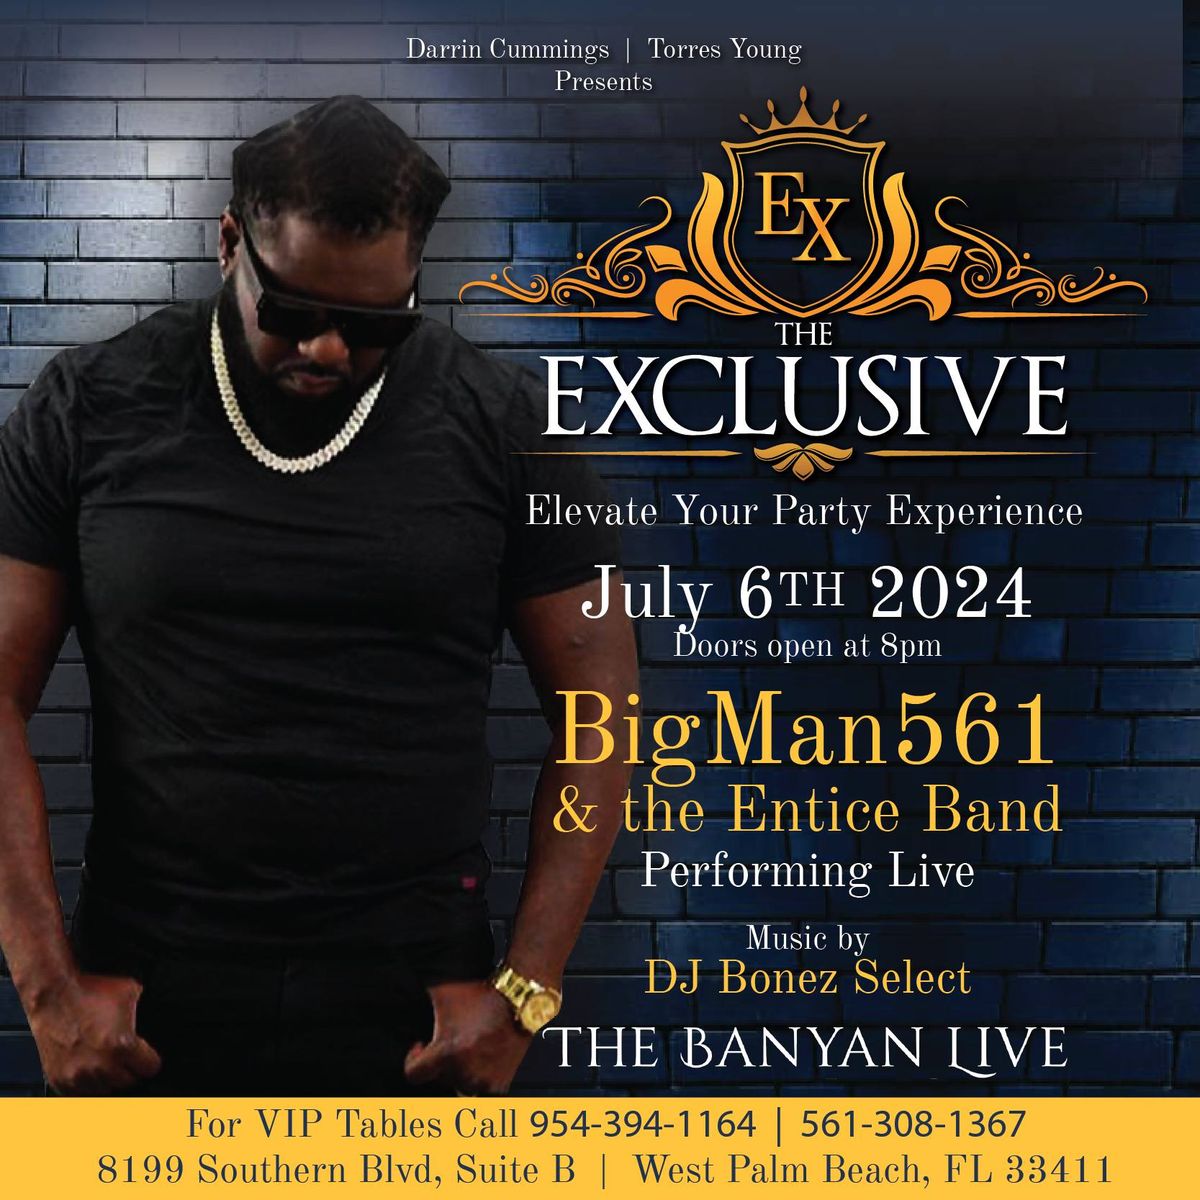 Big Man 561 Live at The Exclusive WPB